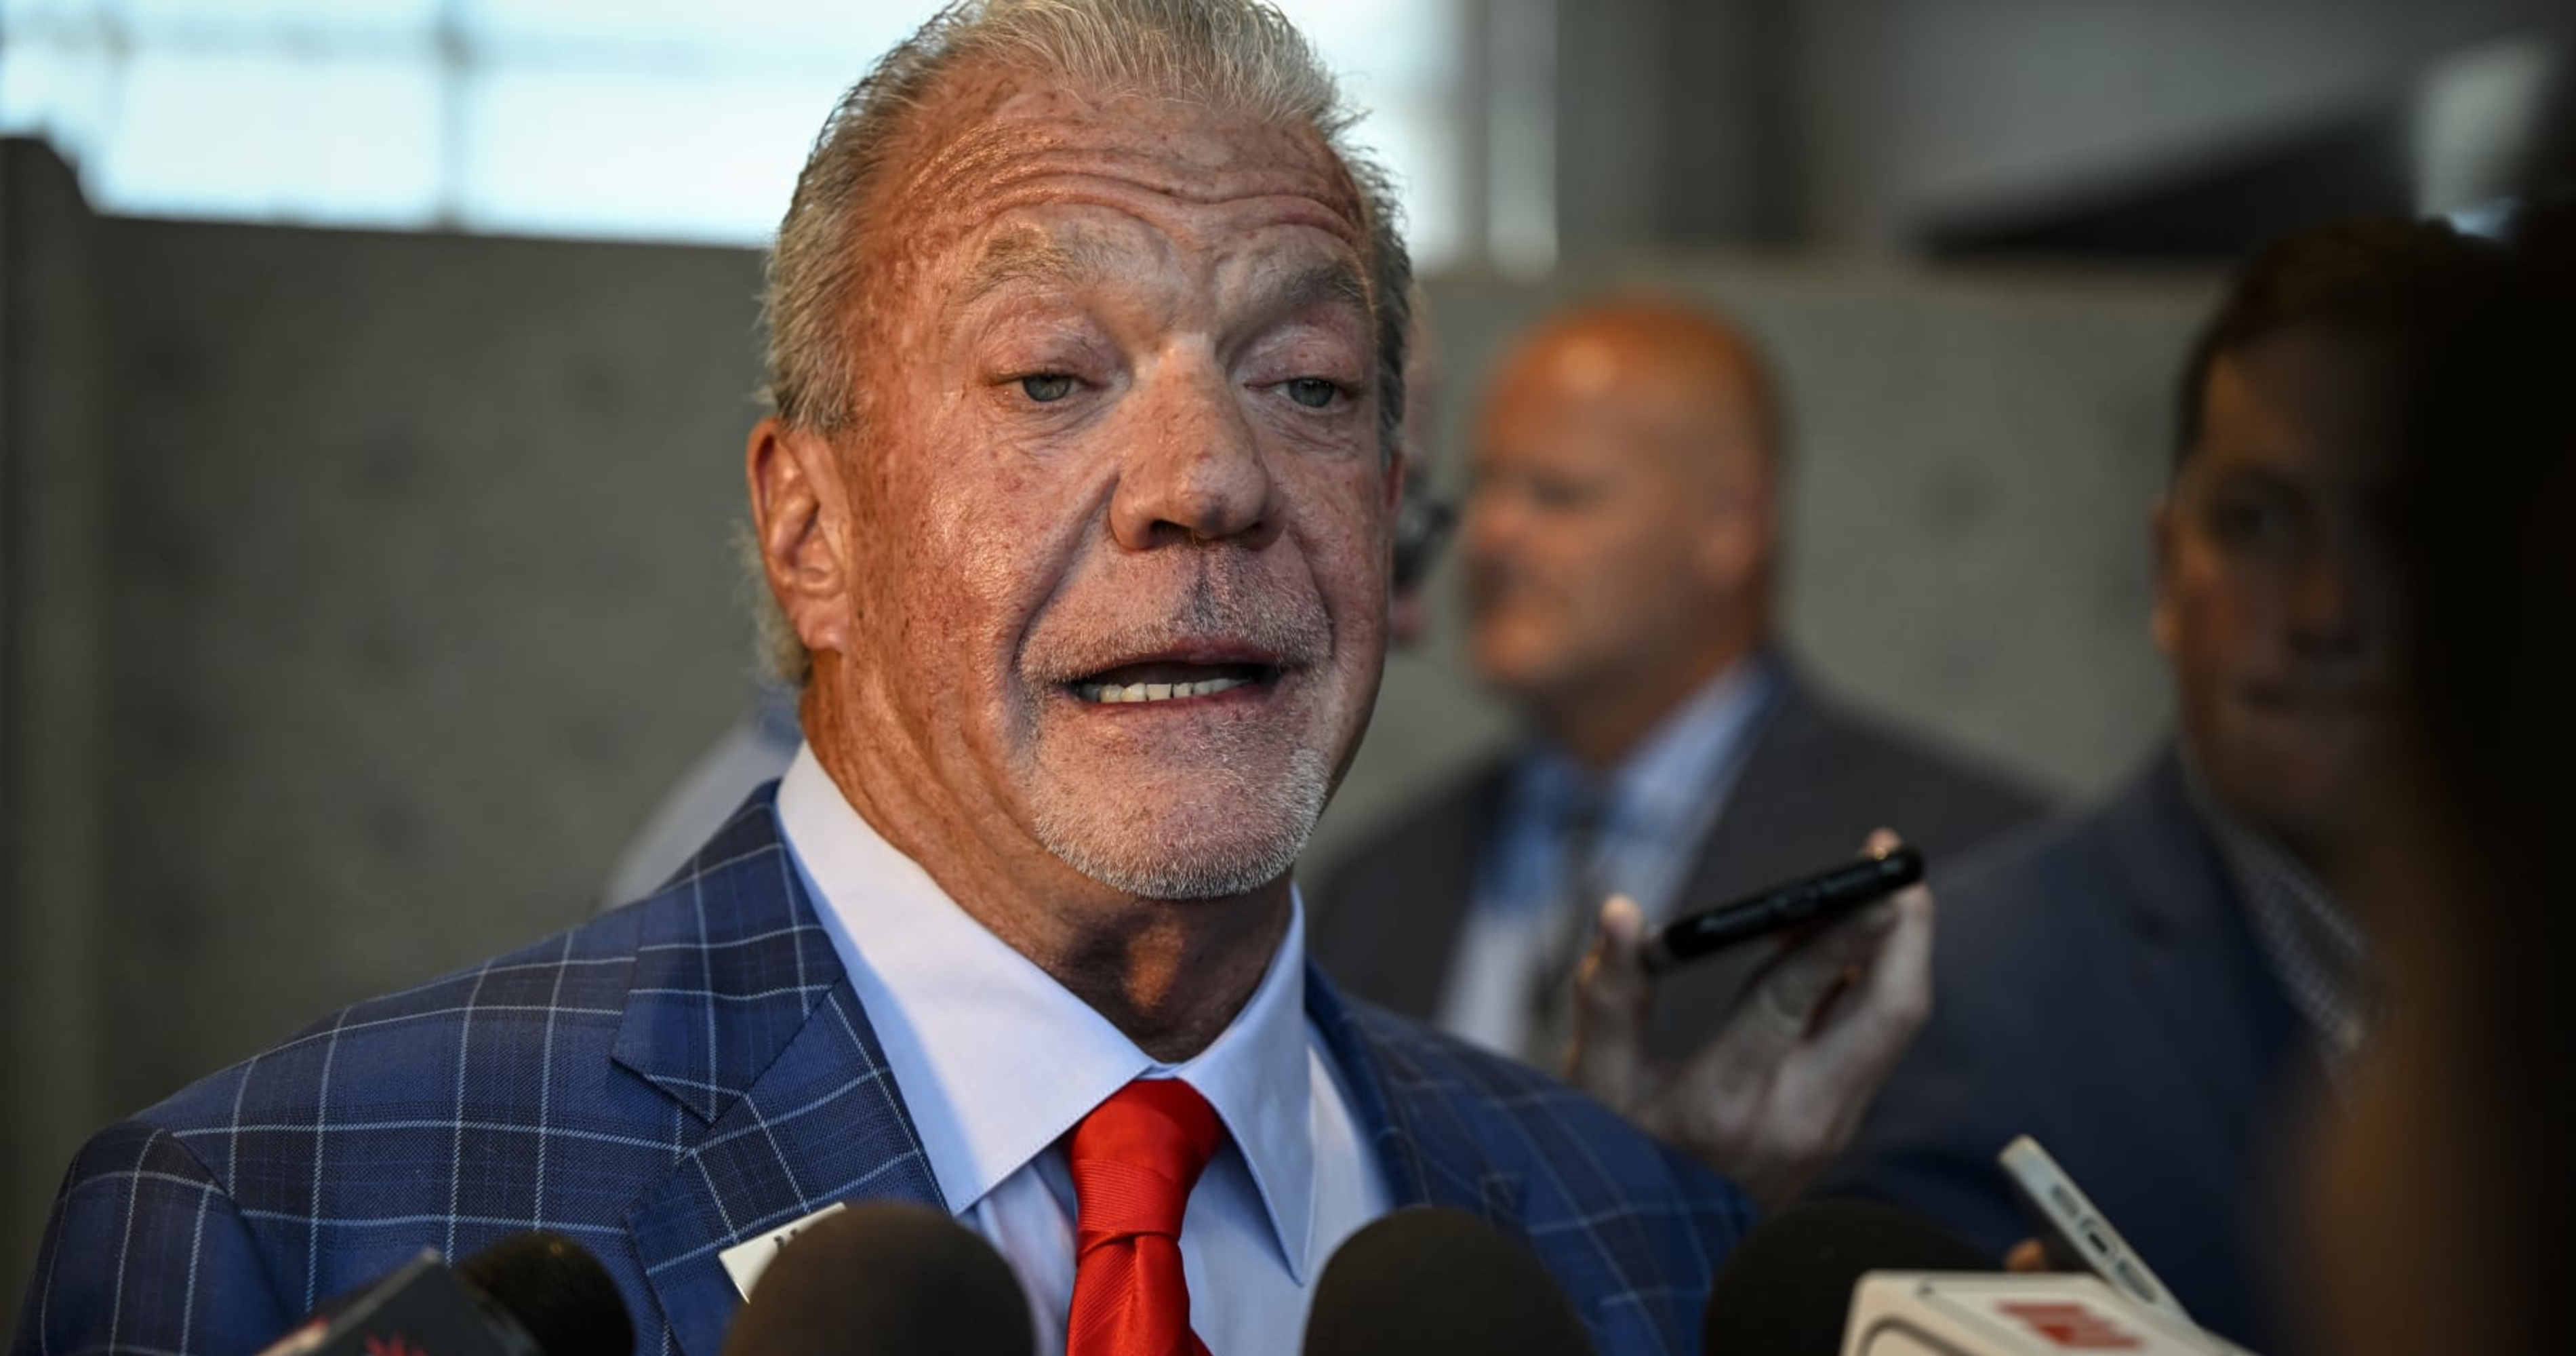 Colts' Jim Irsay: 'I Believe There Is Merit' to Remove Dan Snyder as Commanders ..